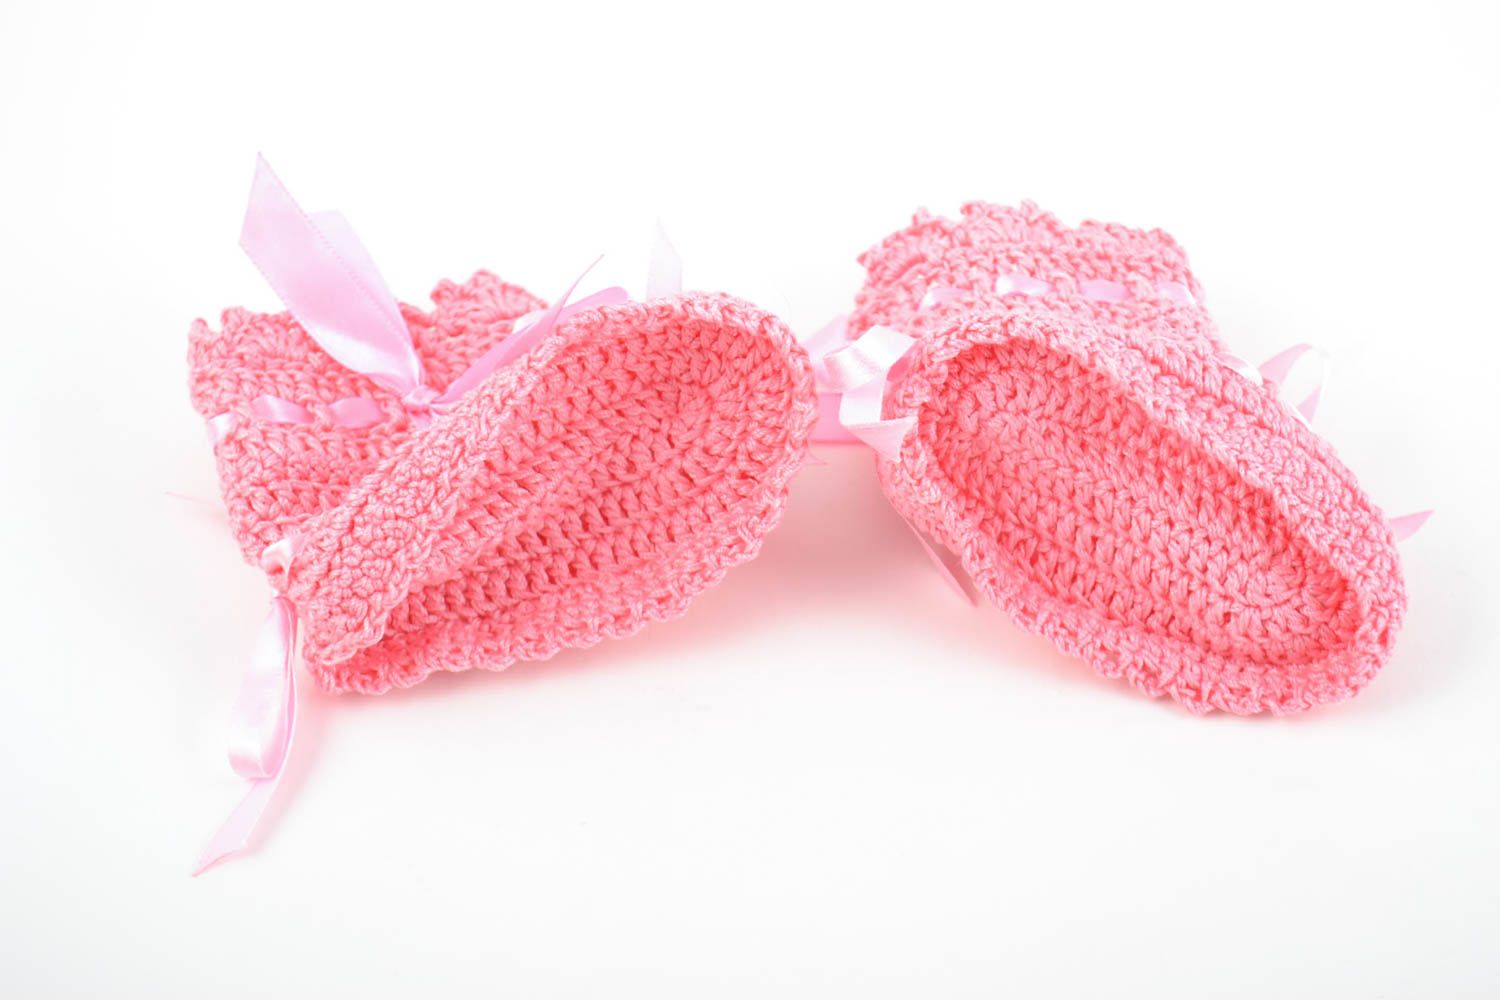 Handmade bright pink crocheted baby girl shoes with satin ribbons lacy booties photo 2